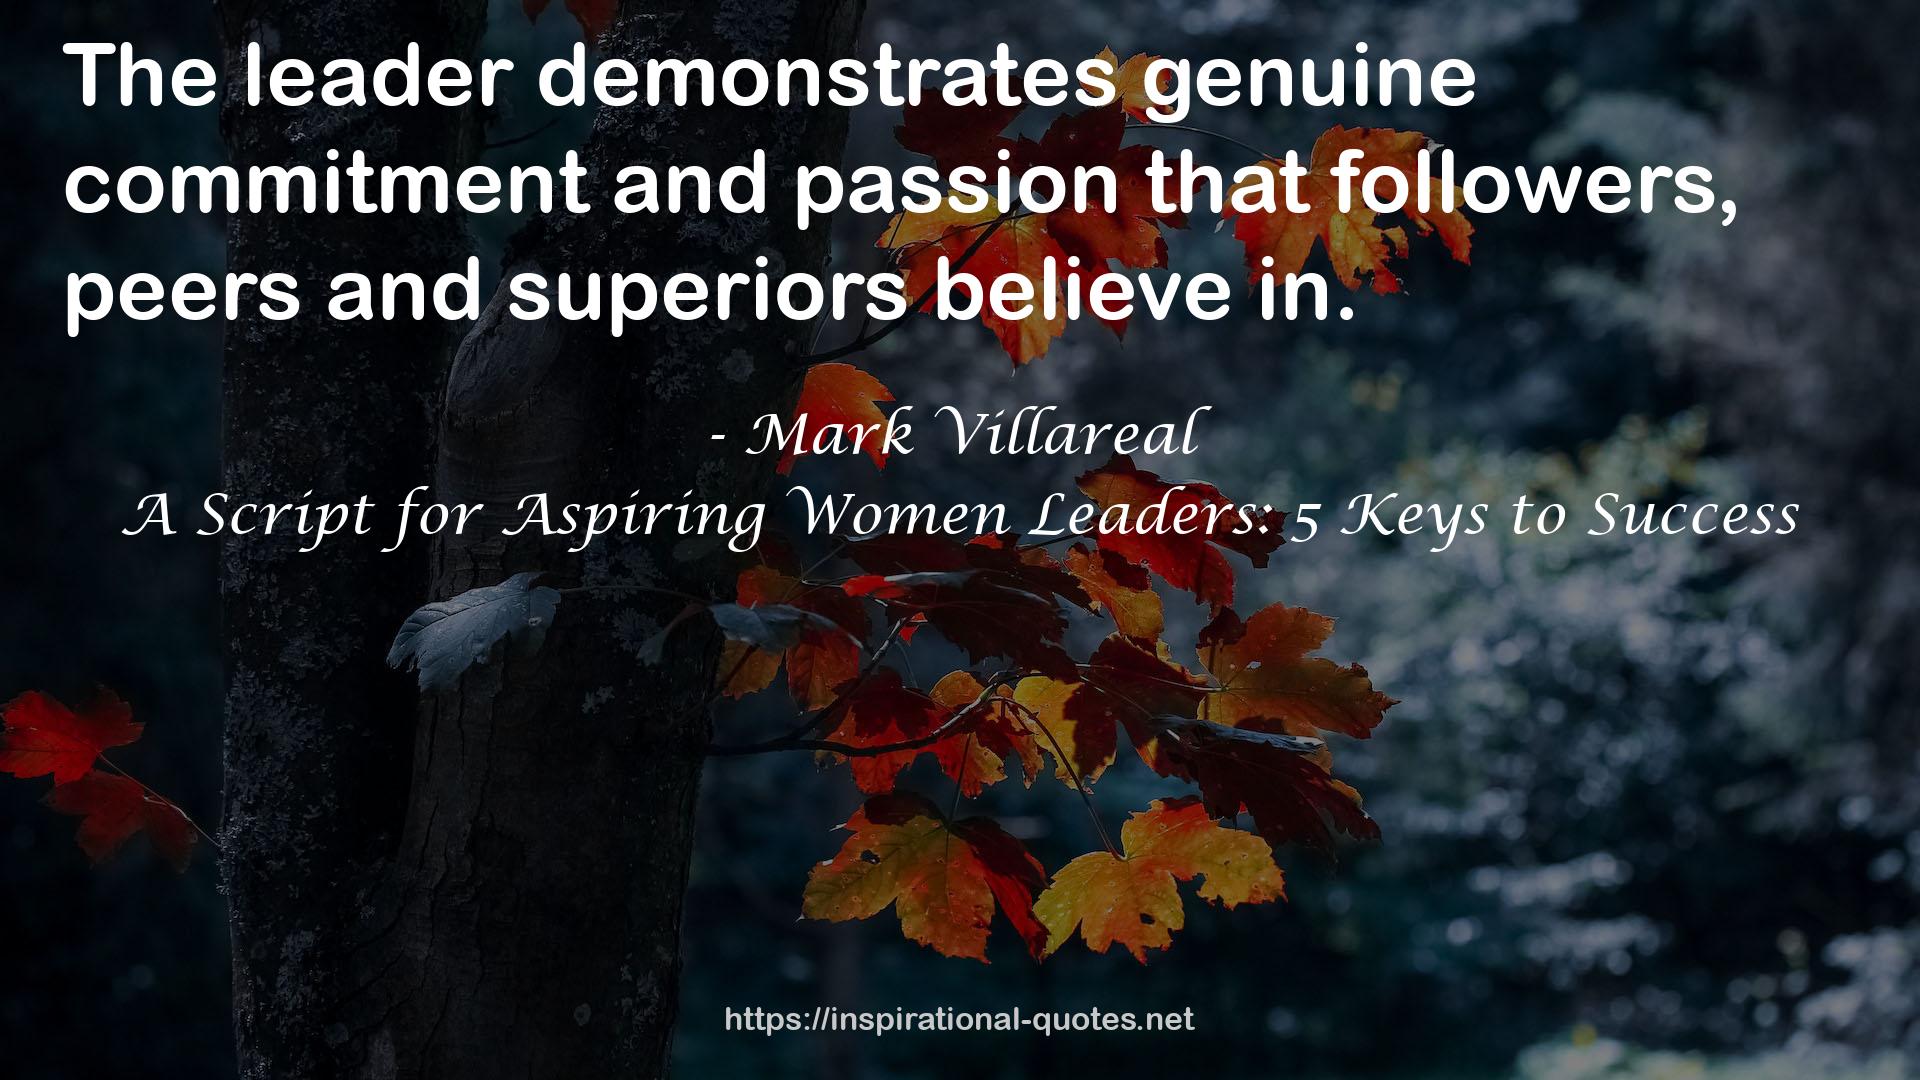 A Script for Aspiring Women Leaders: 5 Keys to Success QUOTES